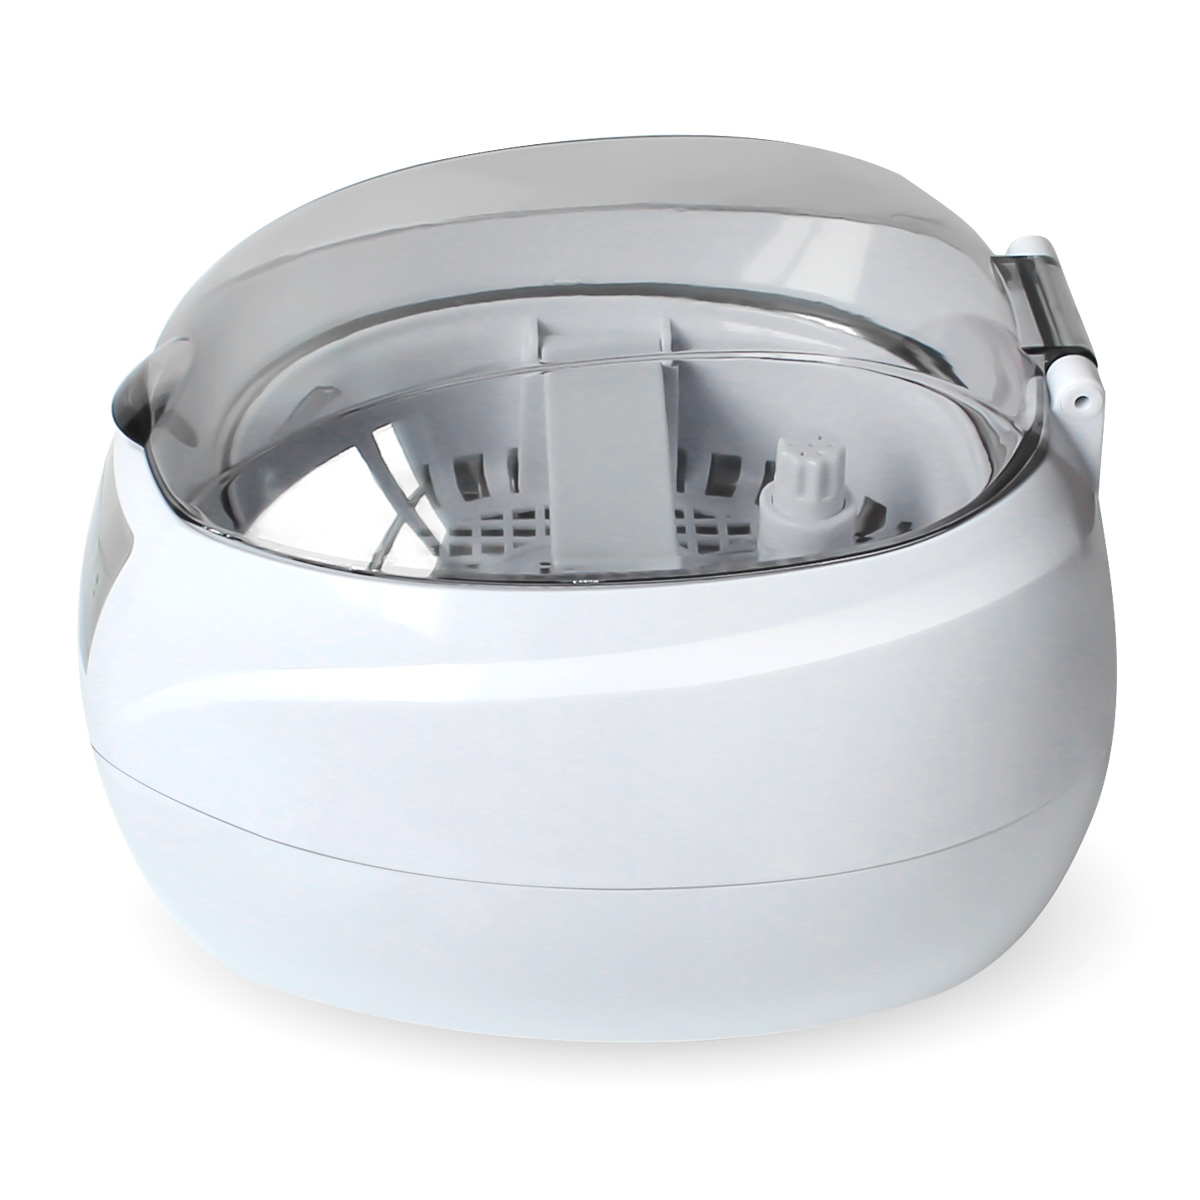 orthodontic tooth braces Ultrasonic cleaner